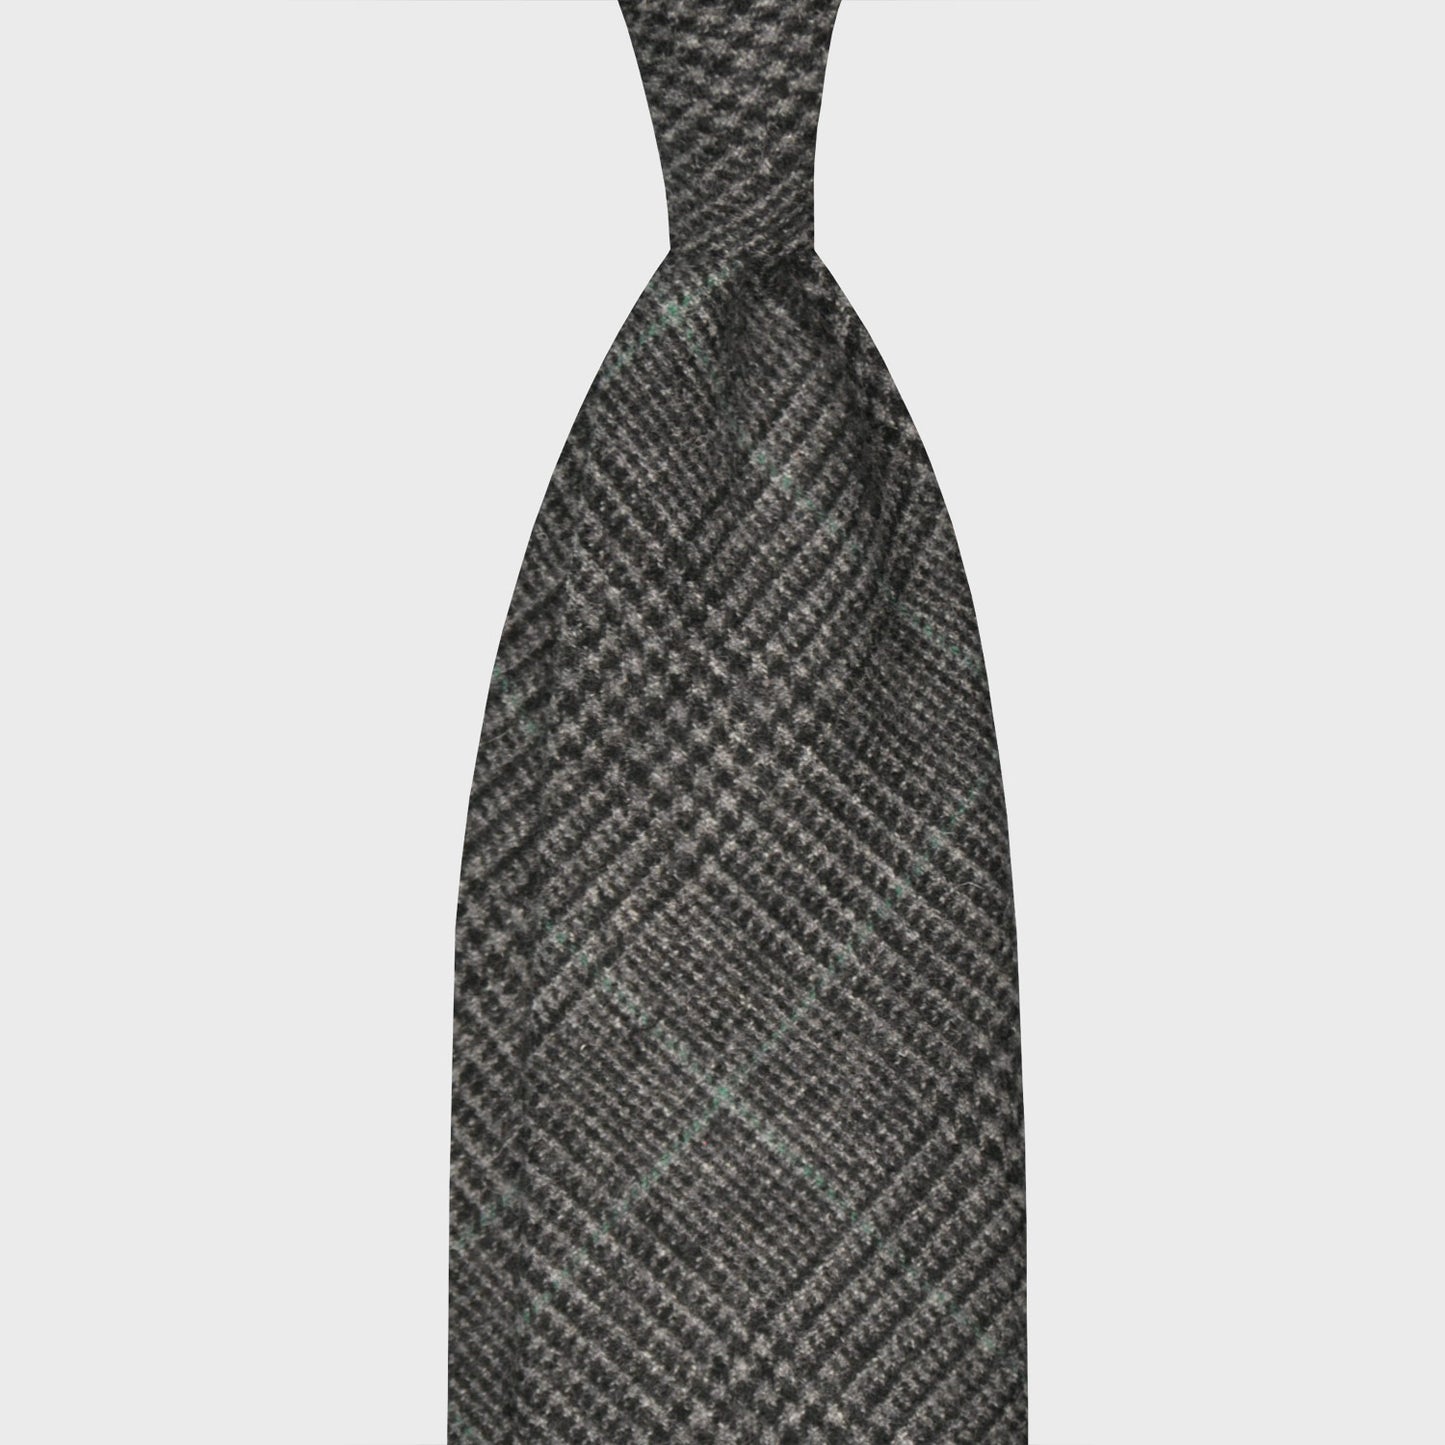 Load image into Gallery viewer, Anthracite Grey Glen Check Wool Tie Unlined F.Marino Napoli. Glen check wool, handmade unlined tie, f marino napoli for Wools Boutique Uomo, anthracite and light grey Prince of Wales pattern, teal green micro windowpane pattern
